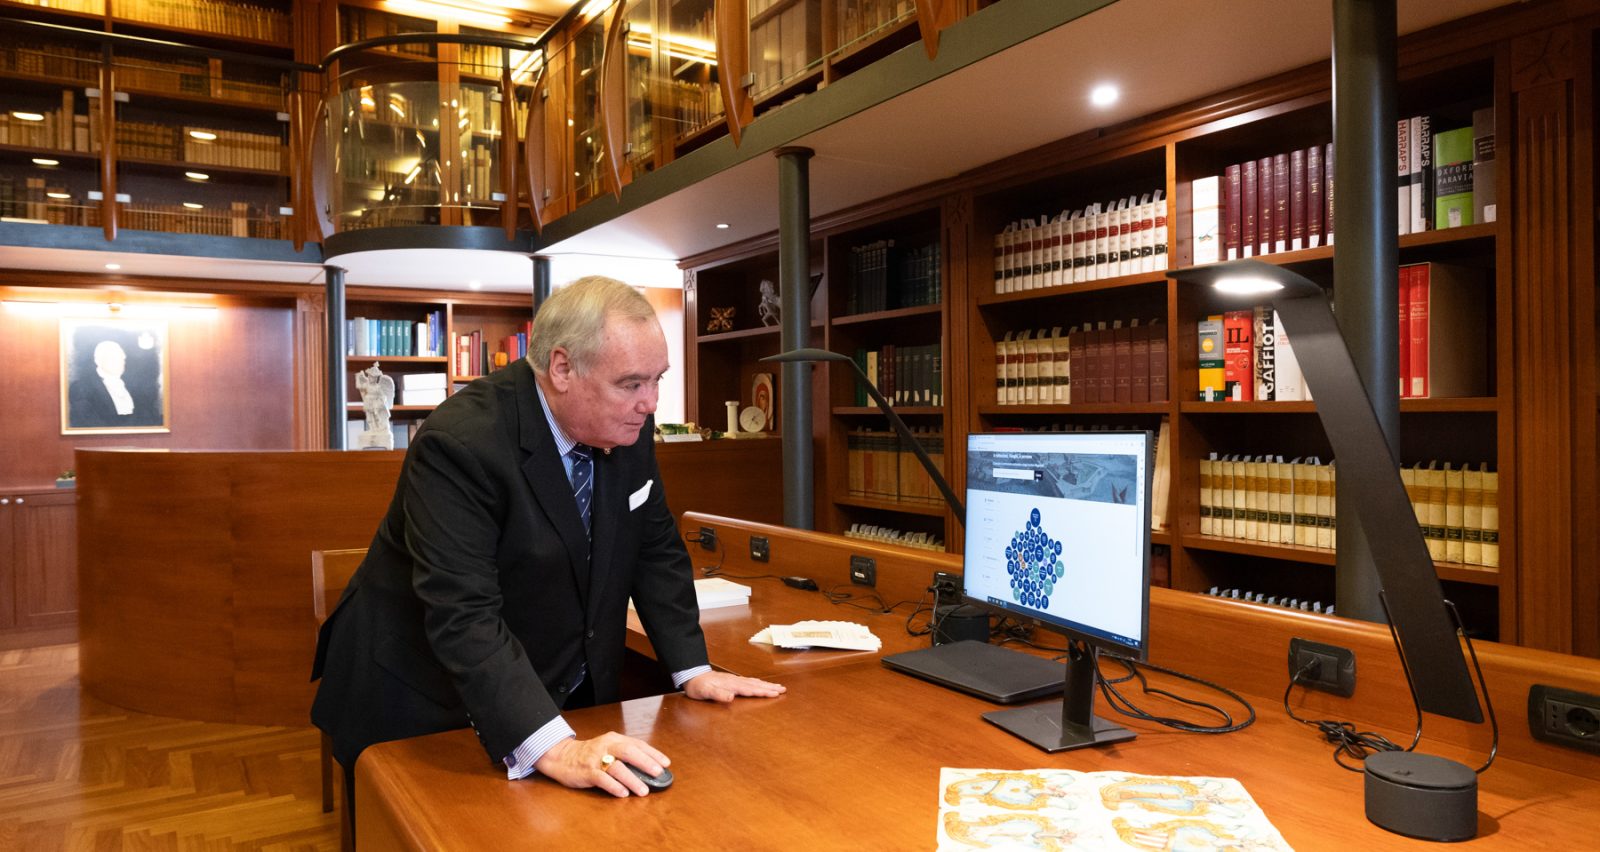 Grand Master inaugurates the new Magistral Archives portal